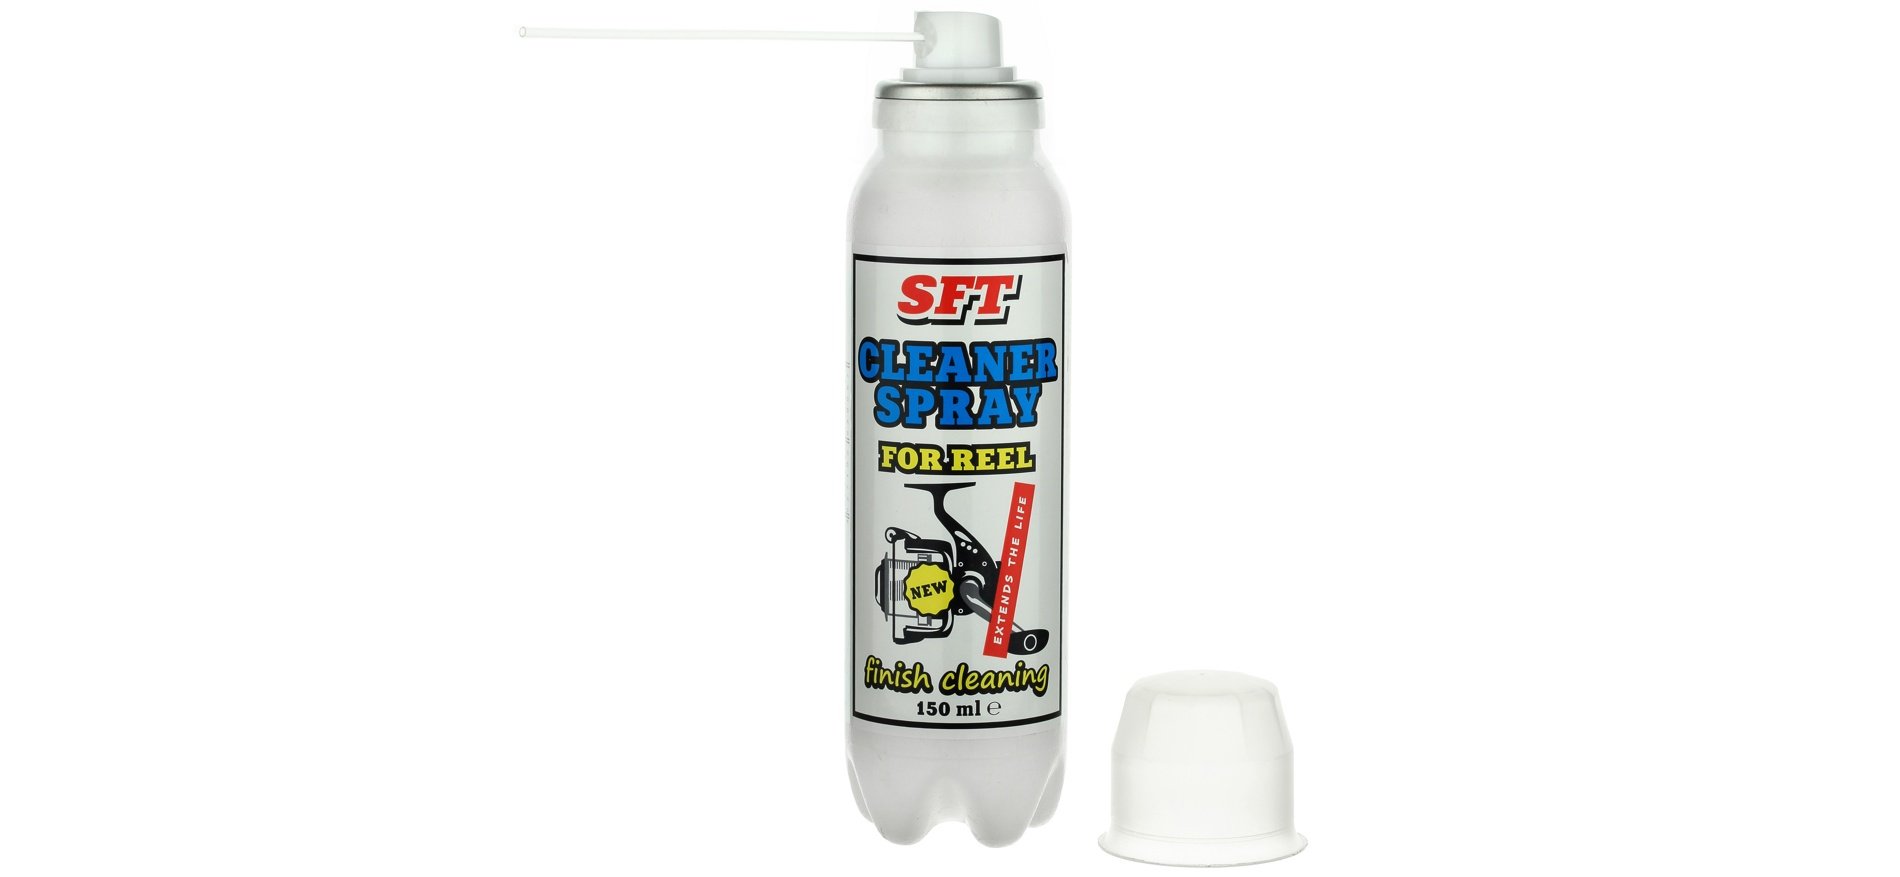  SFT Cleaner Spray -   